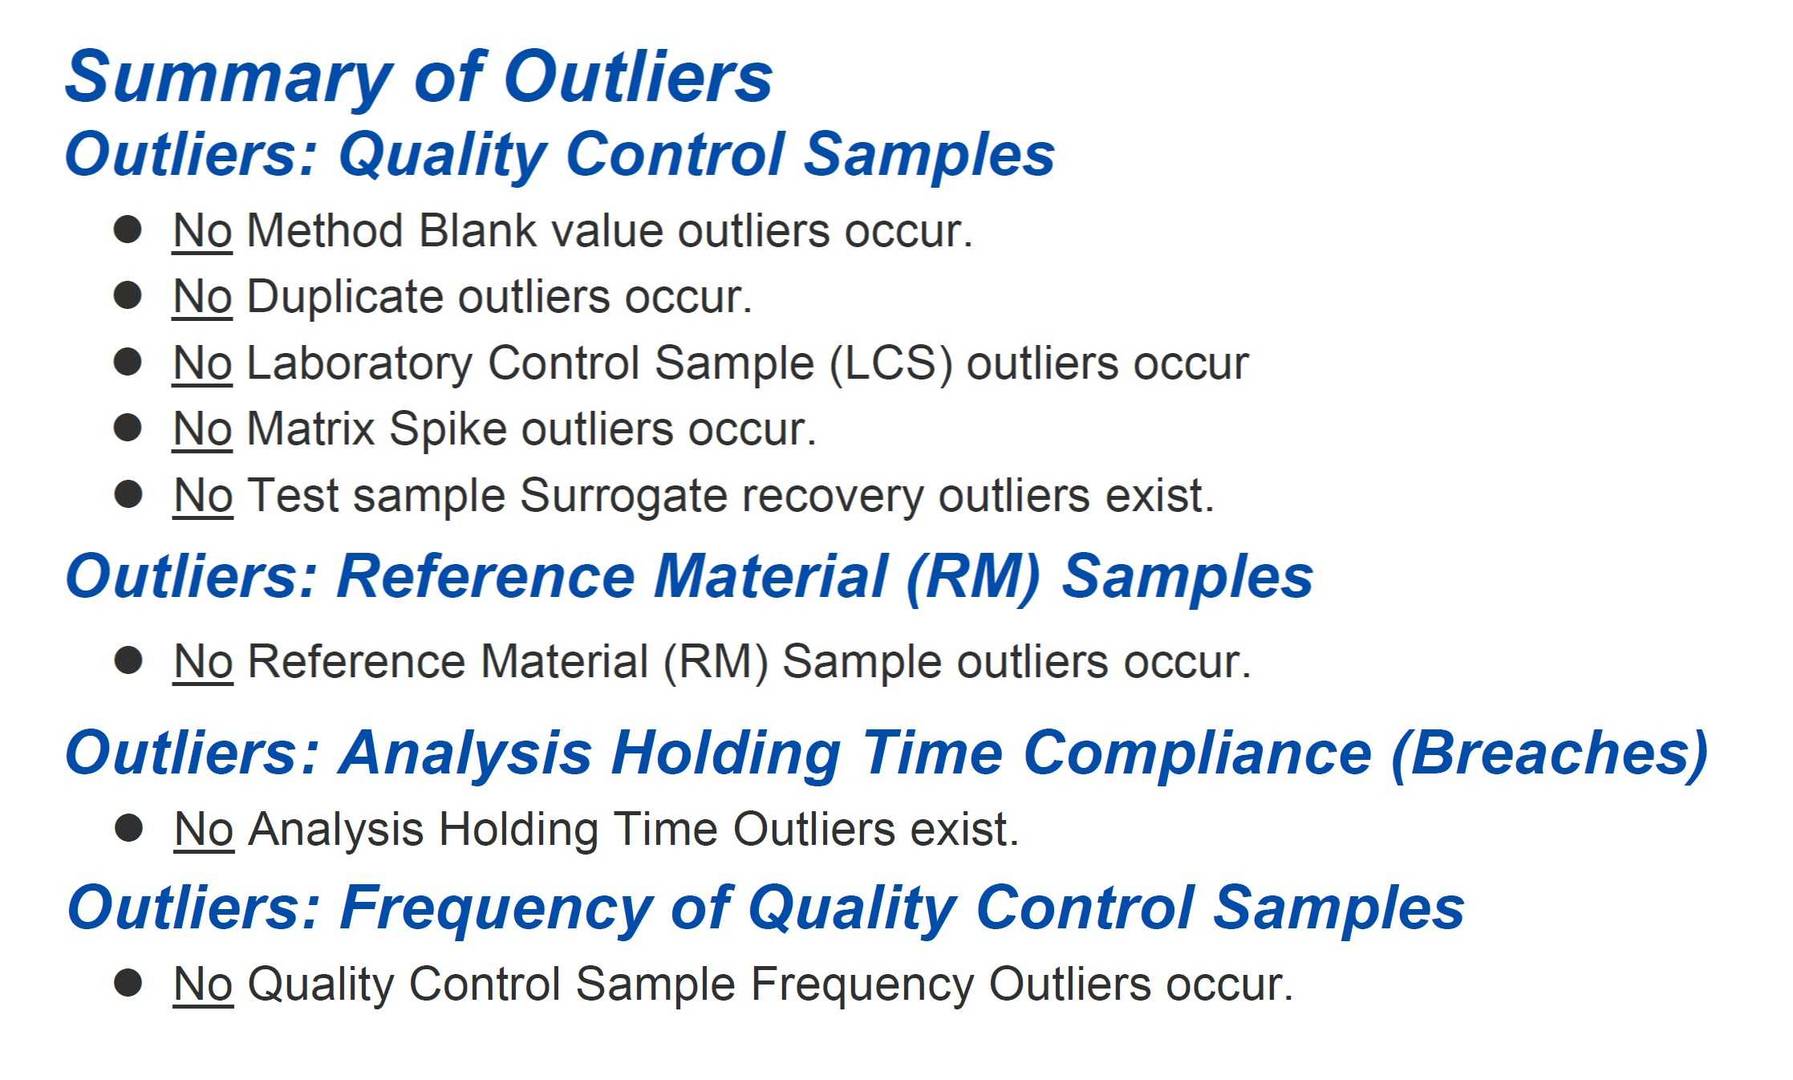 Figure 1:  Summary of Outliers